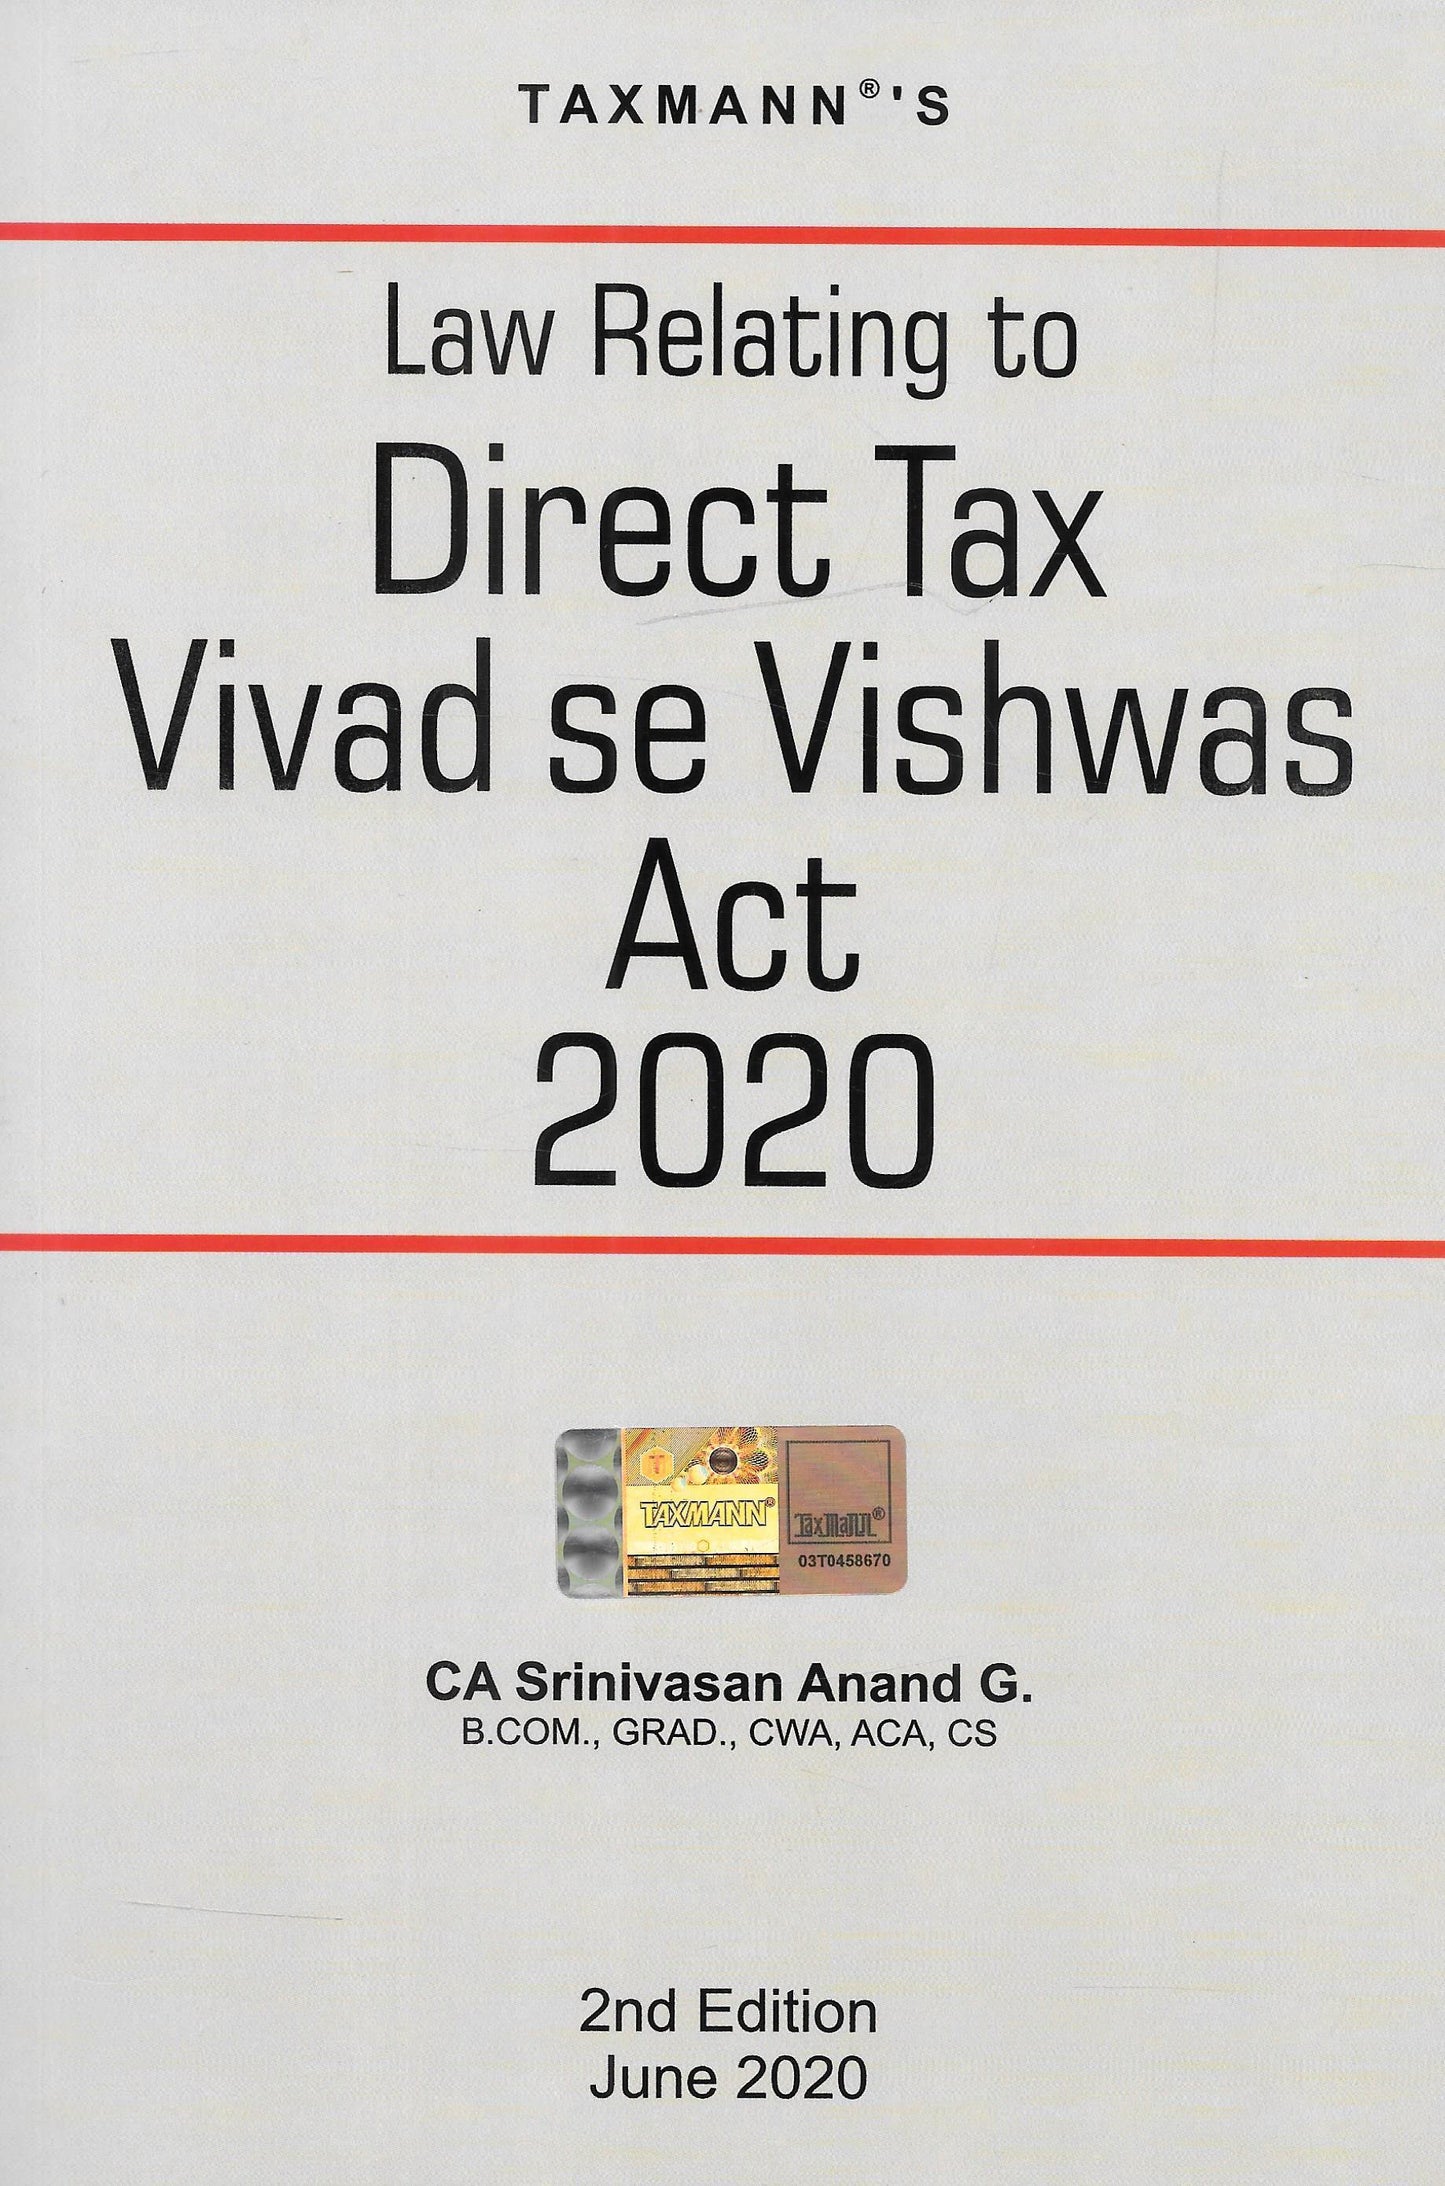 Law Relating to Direct Tax Vivad se Vishwas Act 2020